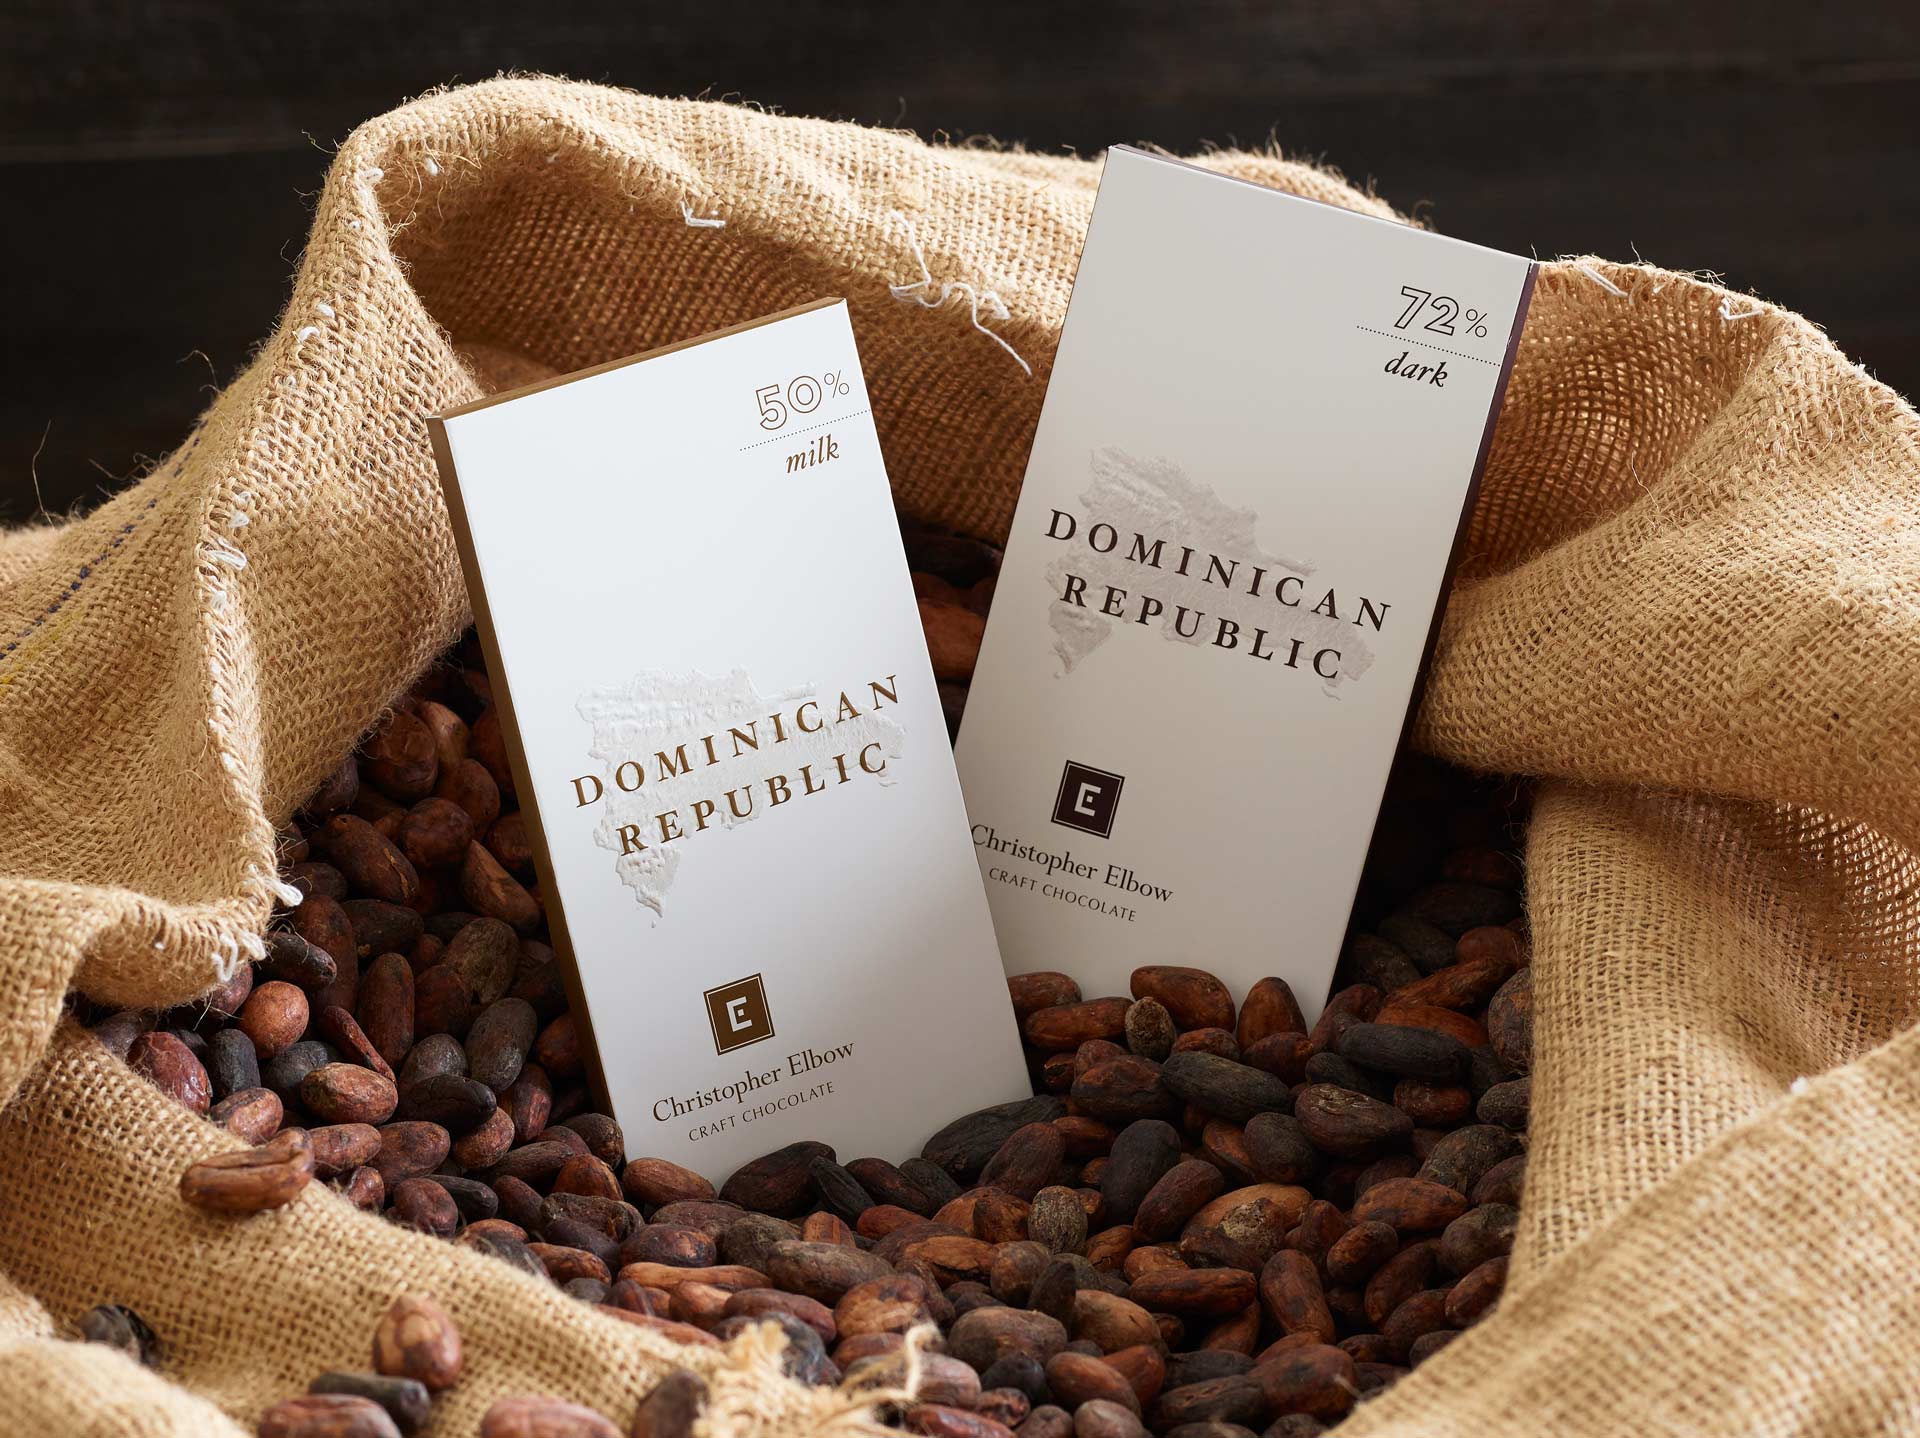 Dark and milk Dominican Republic Christopher Elbow Craft Chocolate bars sitting in an open burlap bag of cocoa beans.